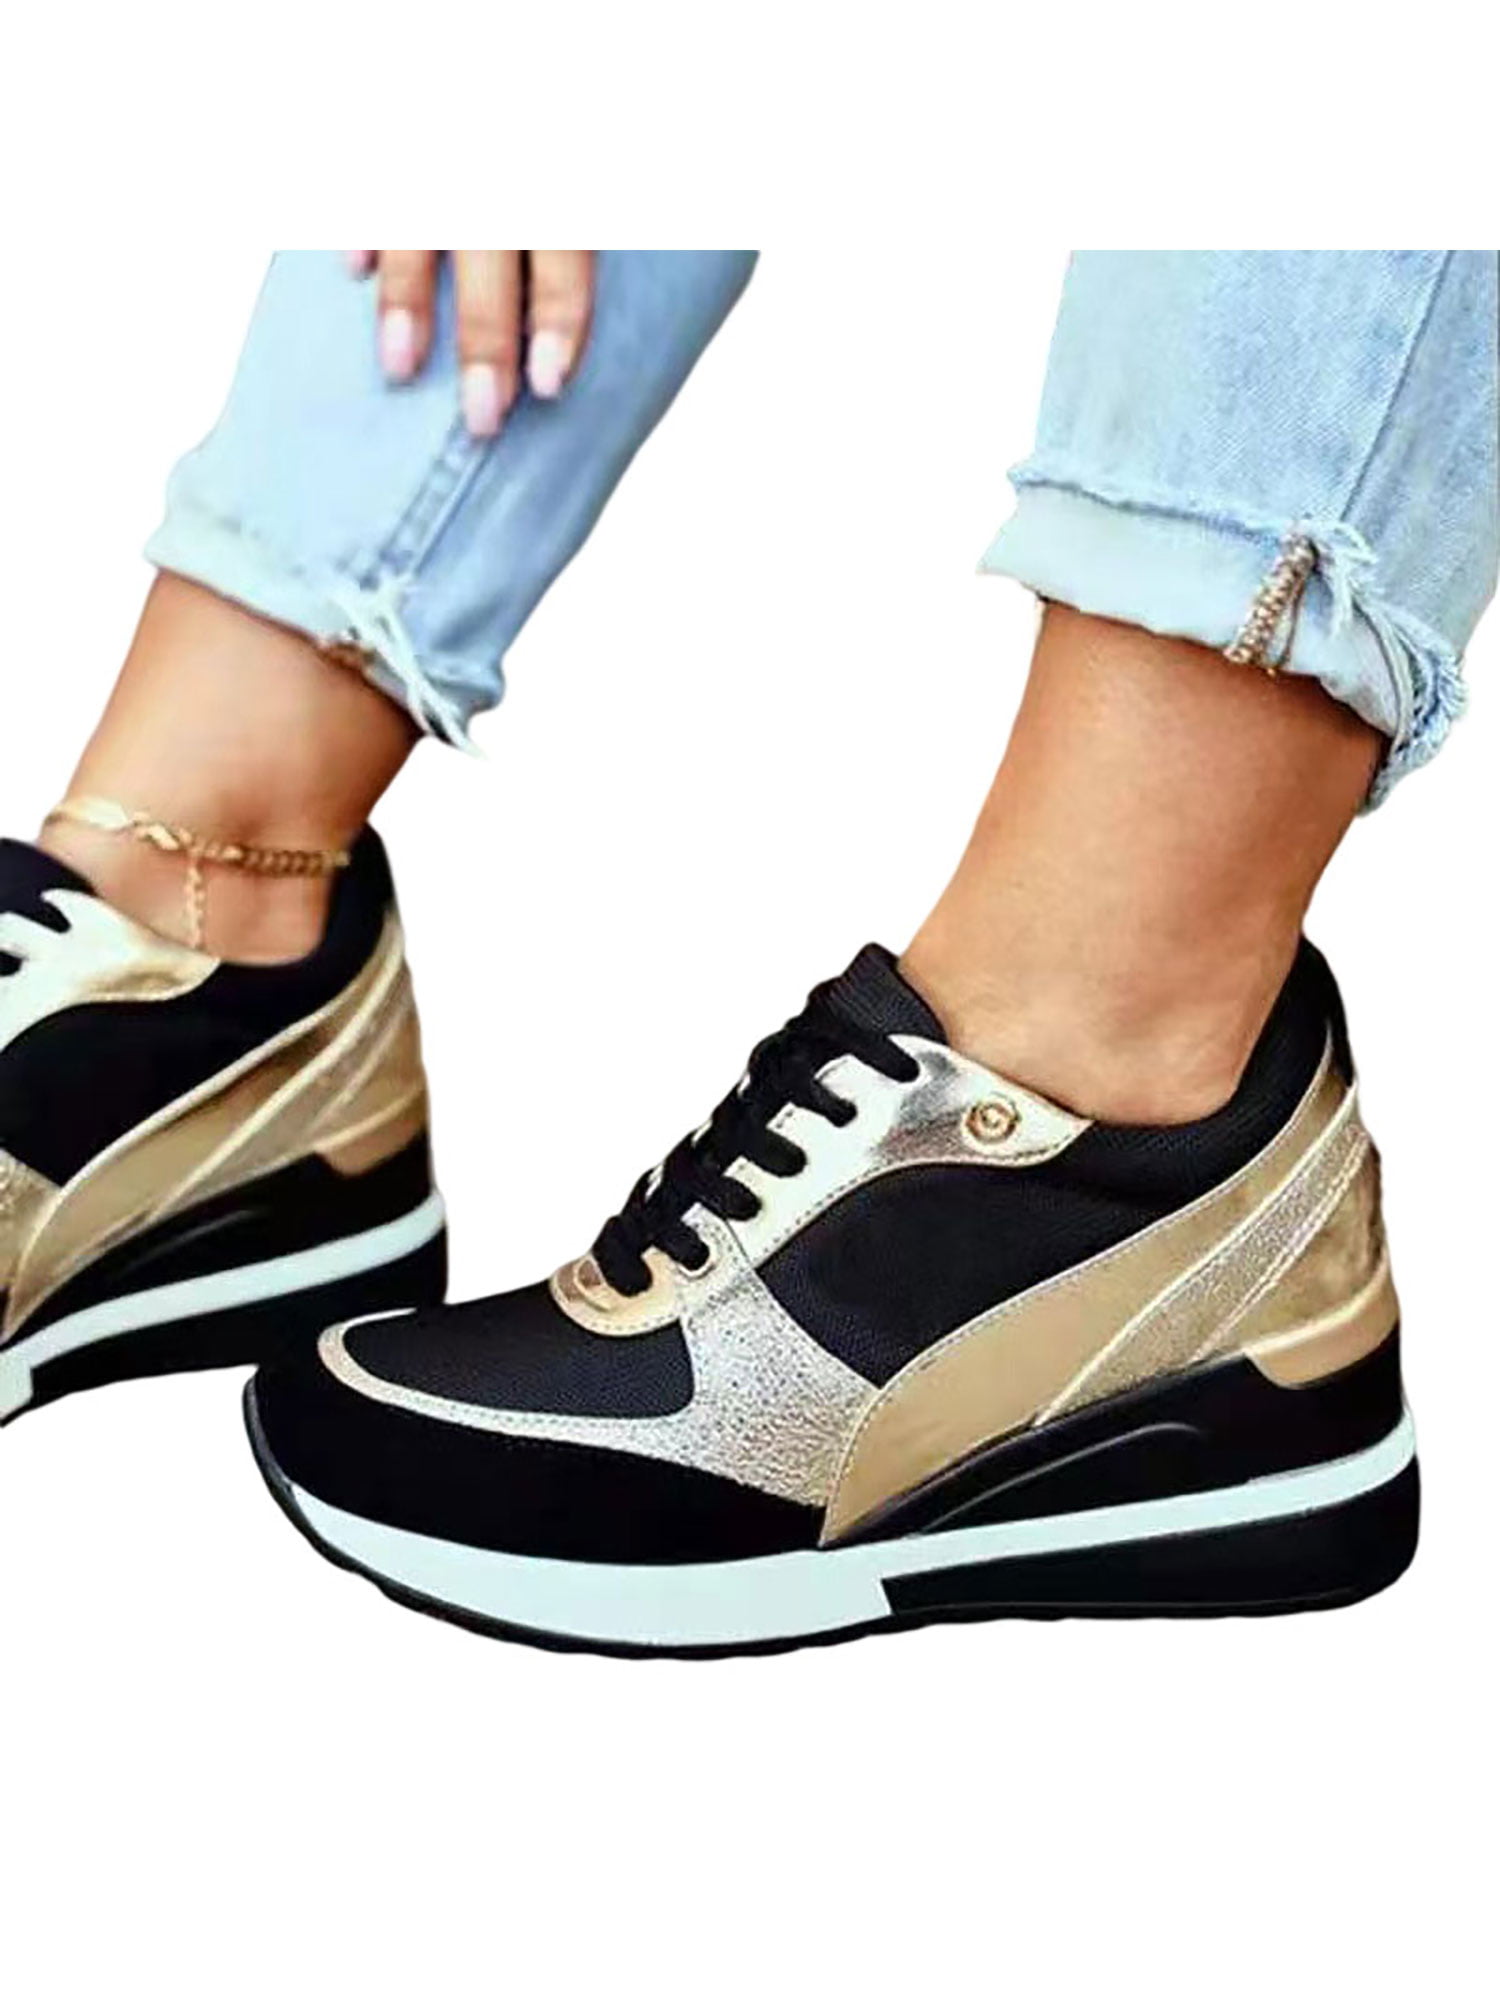 Women's Fashion Breathable Wedge Heels Sneakers Summer F Sports Casual Shoes Hot 